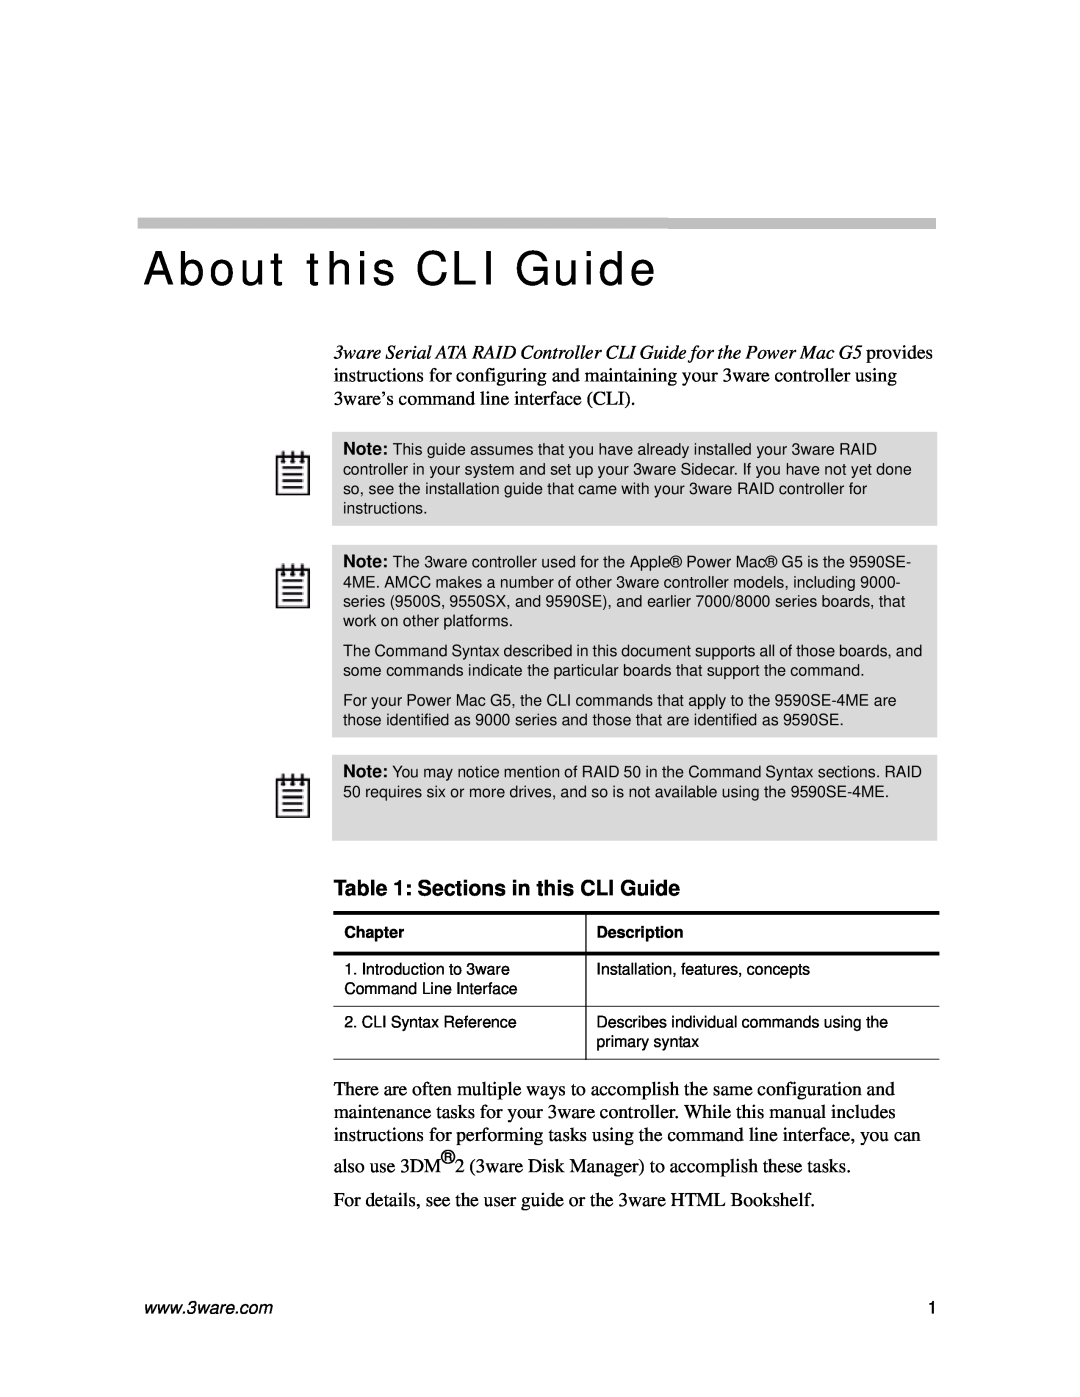 AMCC 9590SE-4ME manual About this CLI Guide, Sections in this CLI Guide 